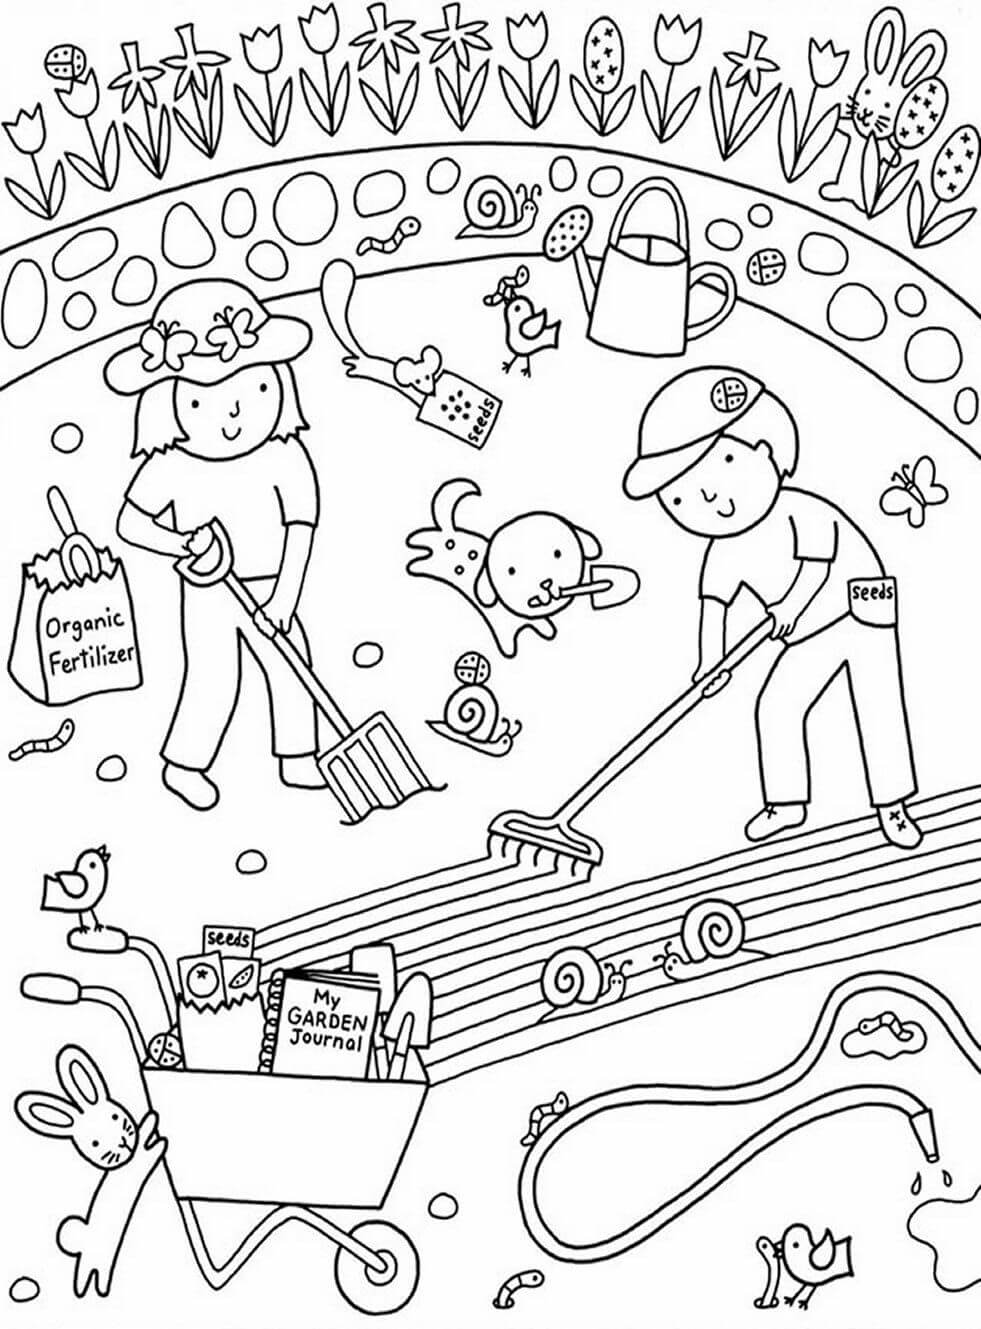 Starting a Garden Coloring Page